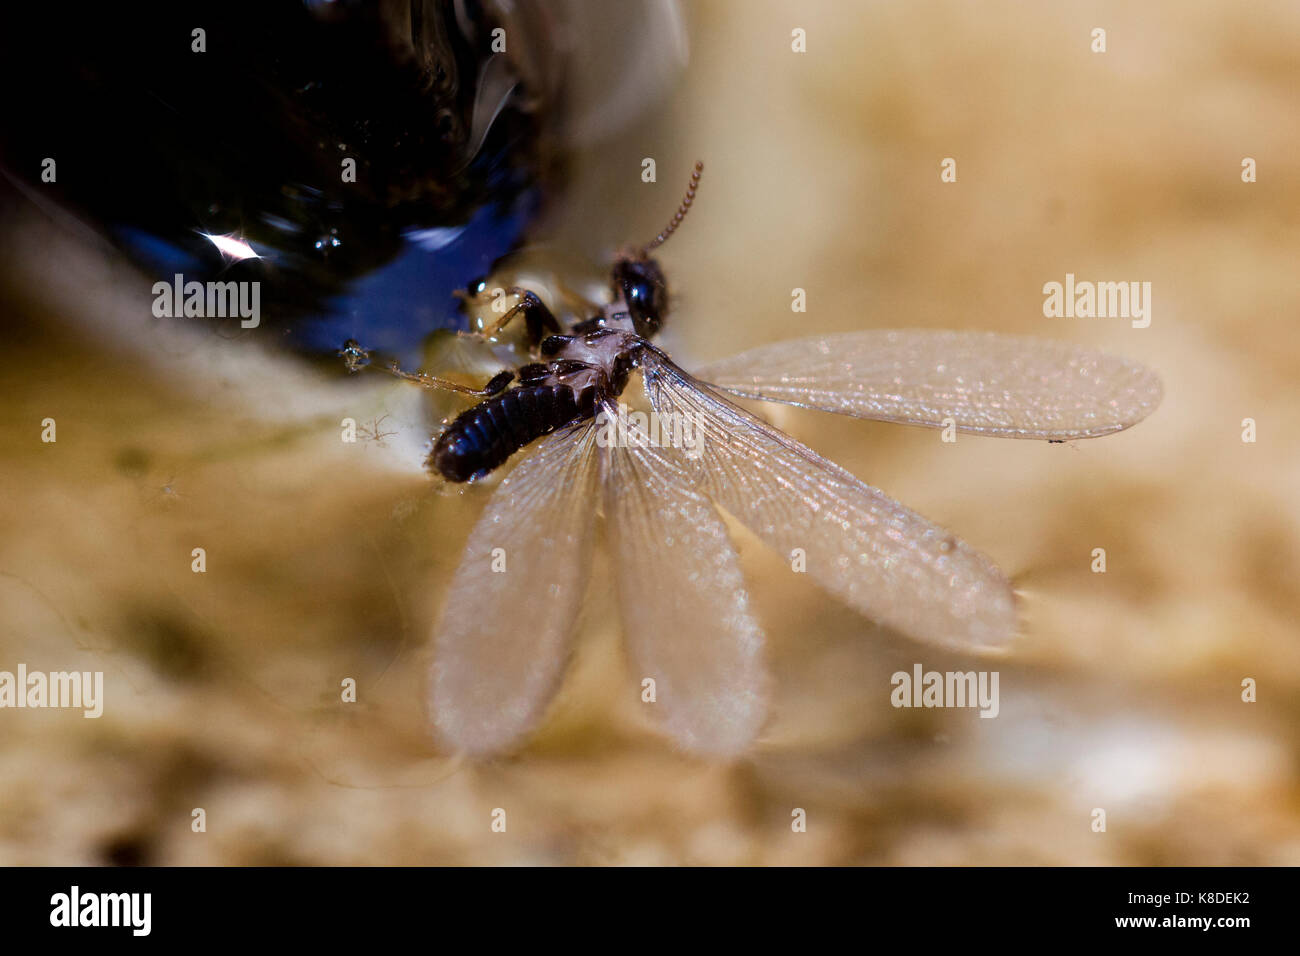 Insect trapped on water surface due to physics science of surface tension Stock Photo